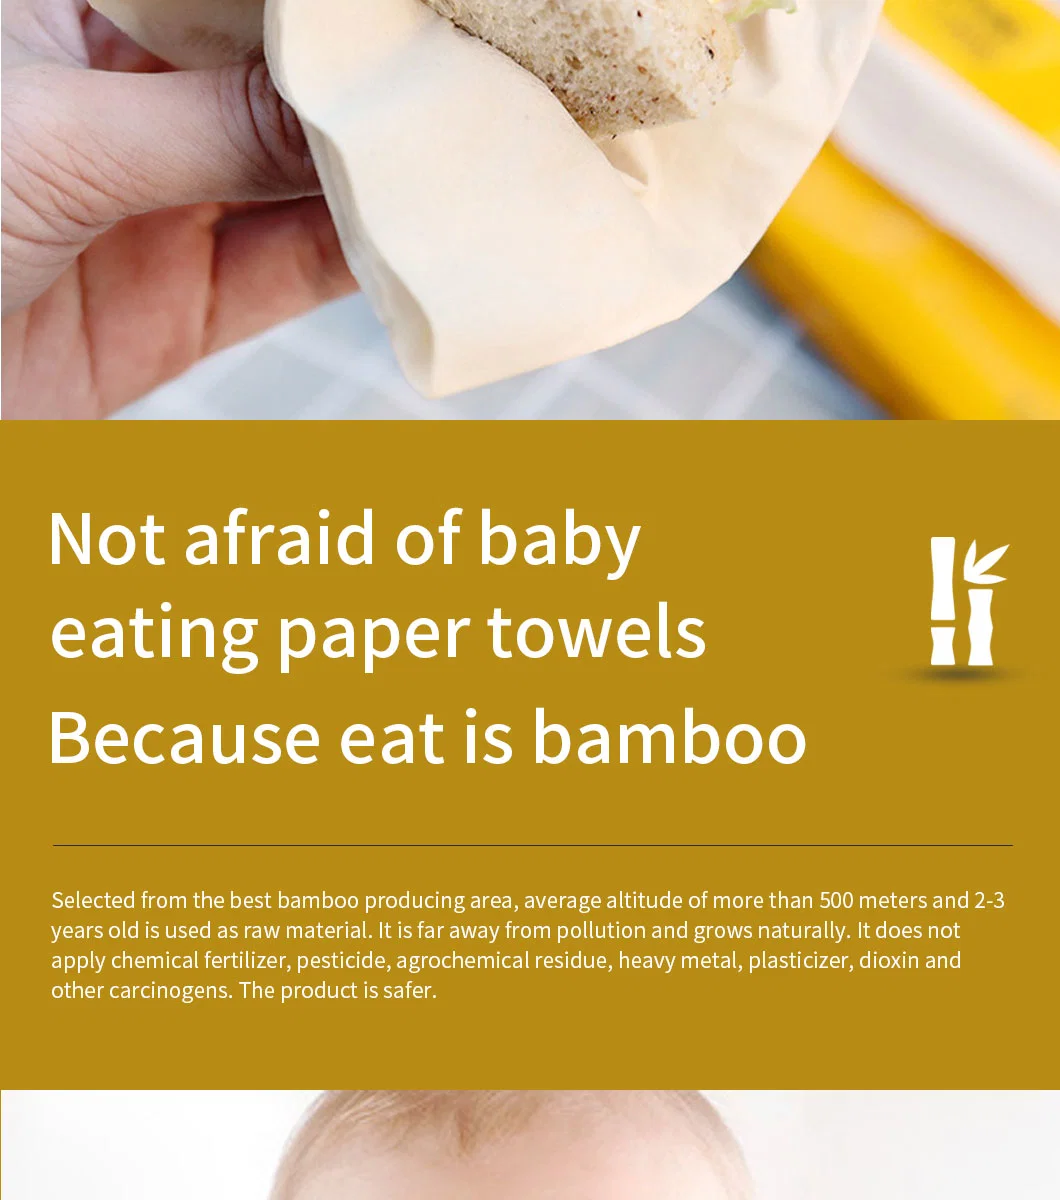 Bamboo Facial Tissue Paper Towel for Kids and Baby Used I Double Thick Touch Feeling I Natural Smell of Bamboo Good for Household